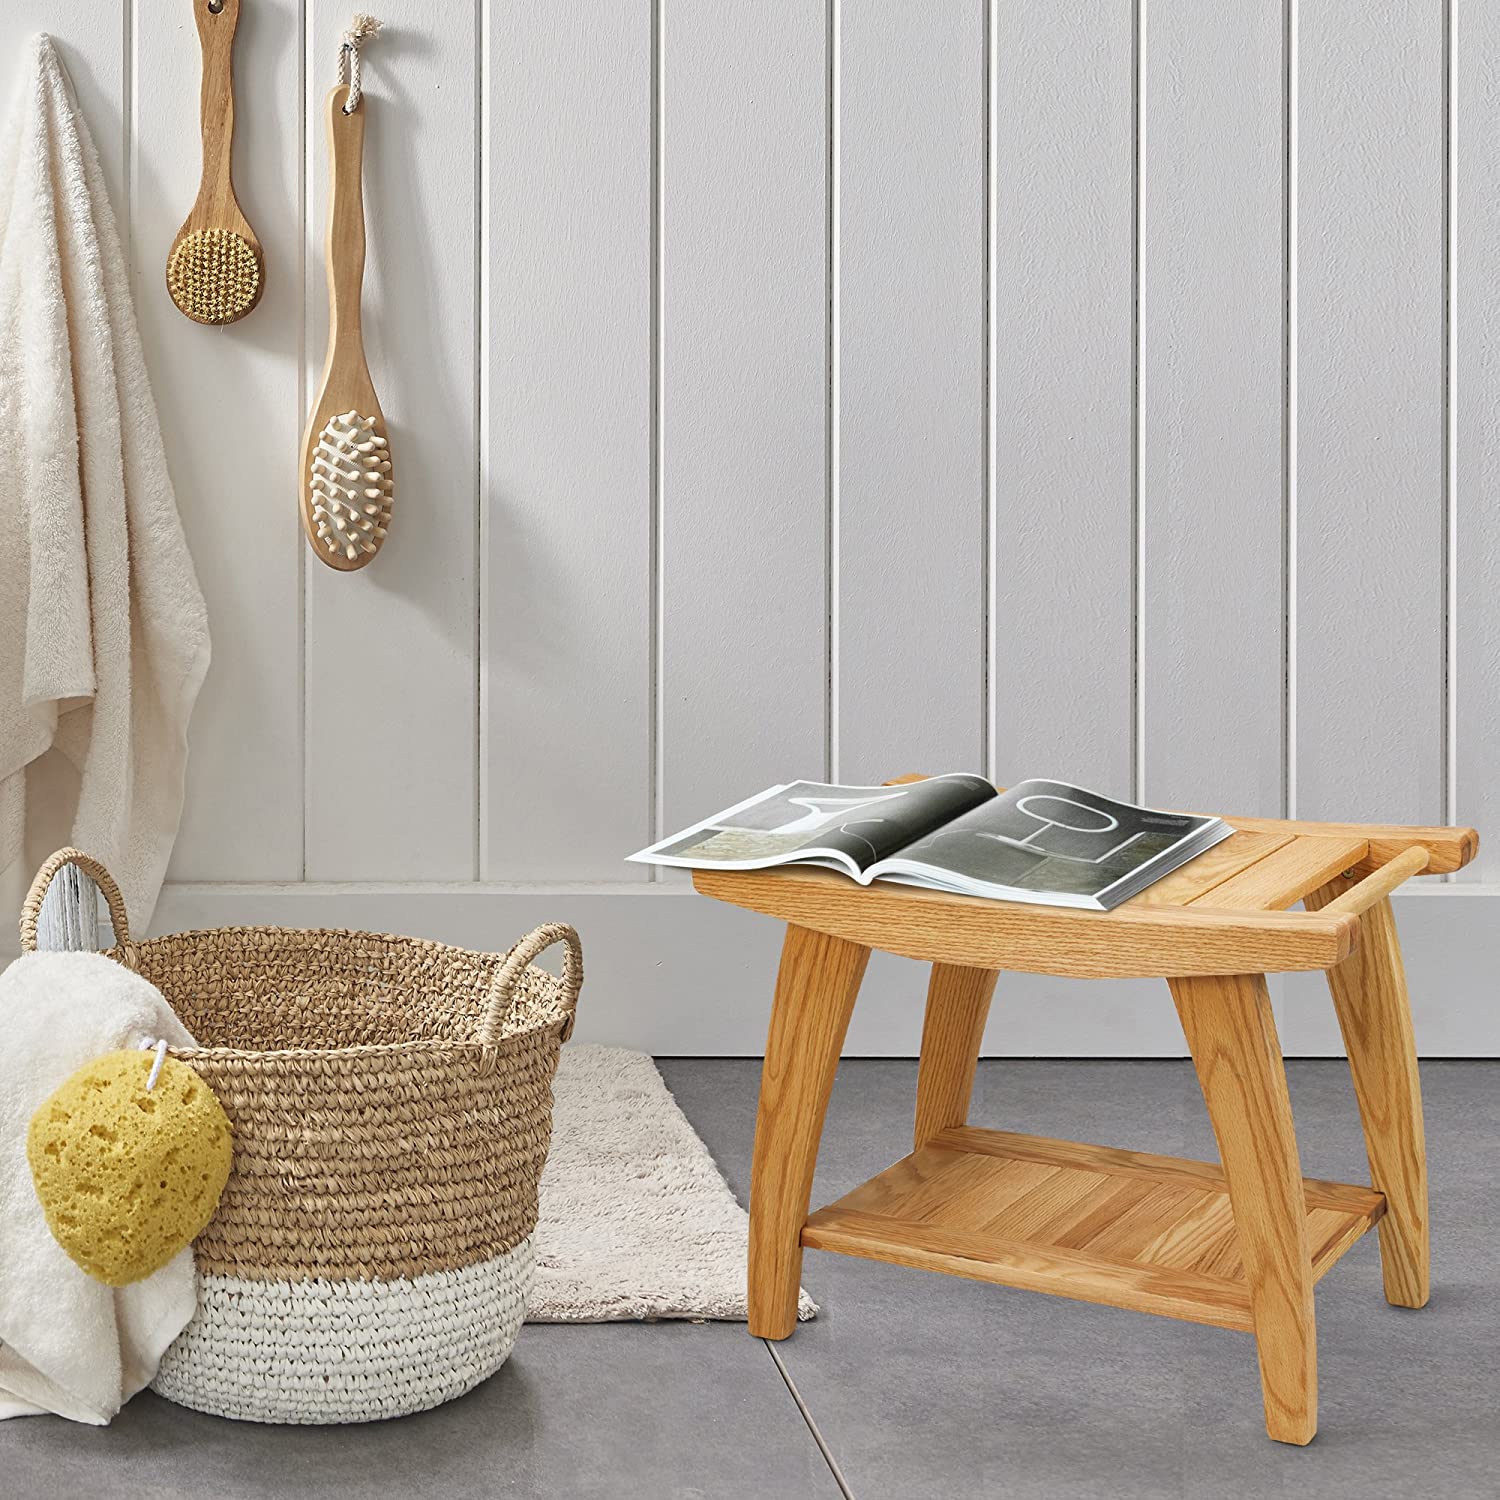 American Trails Tao Solid White Oak Shower Bench, Natural